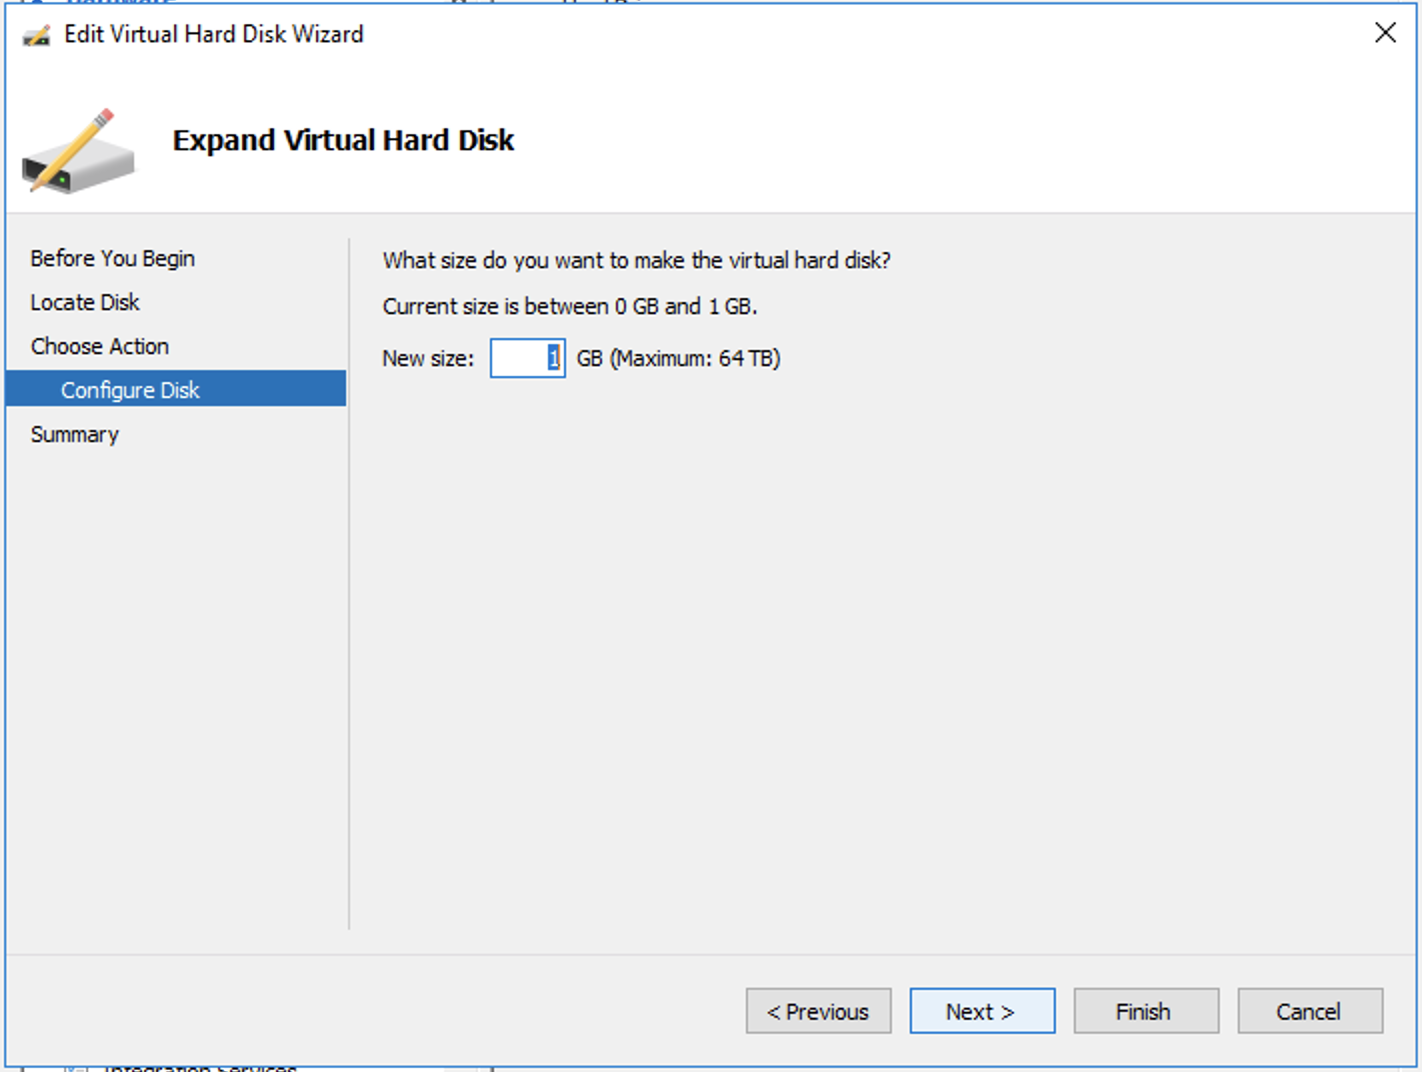 Expanding the hard drive in Hyper-V: Expand Virtual Hard Disk page